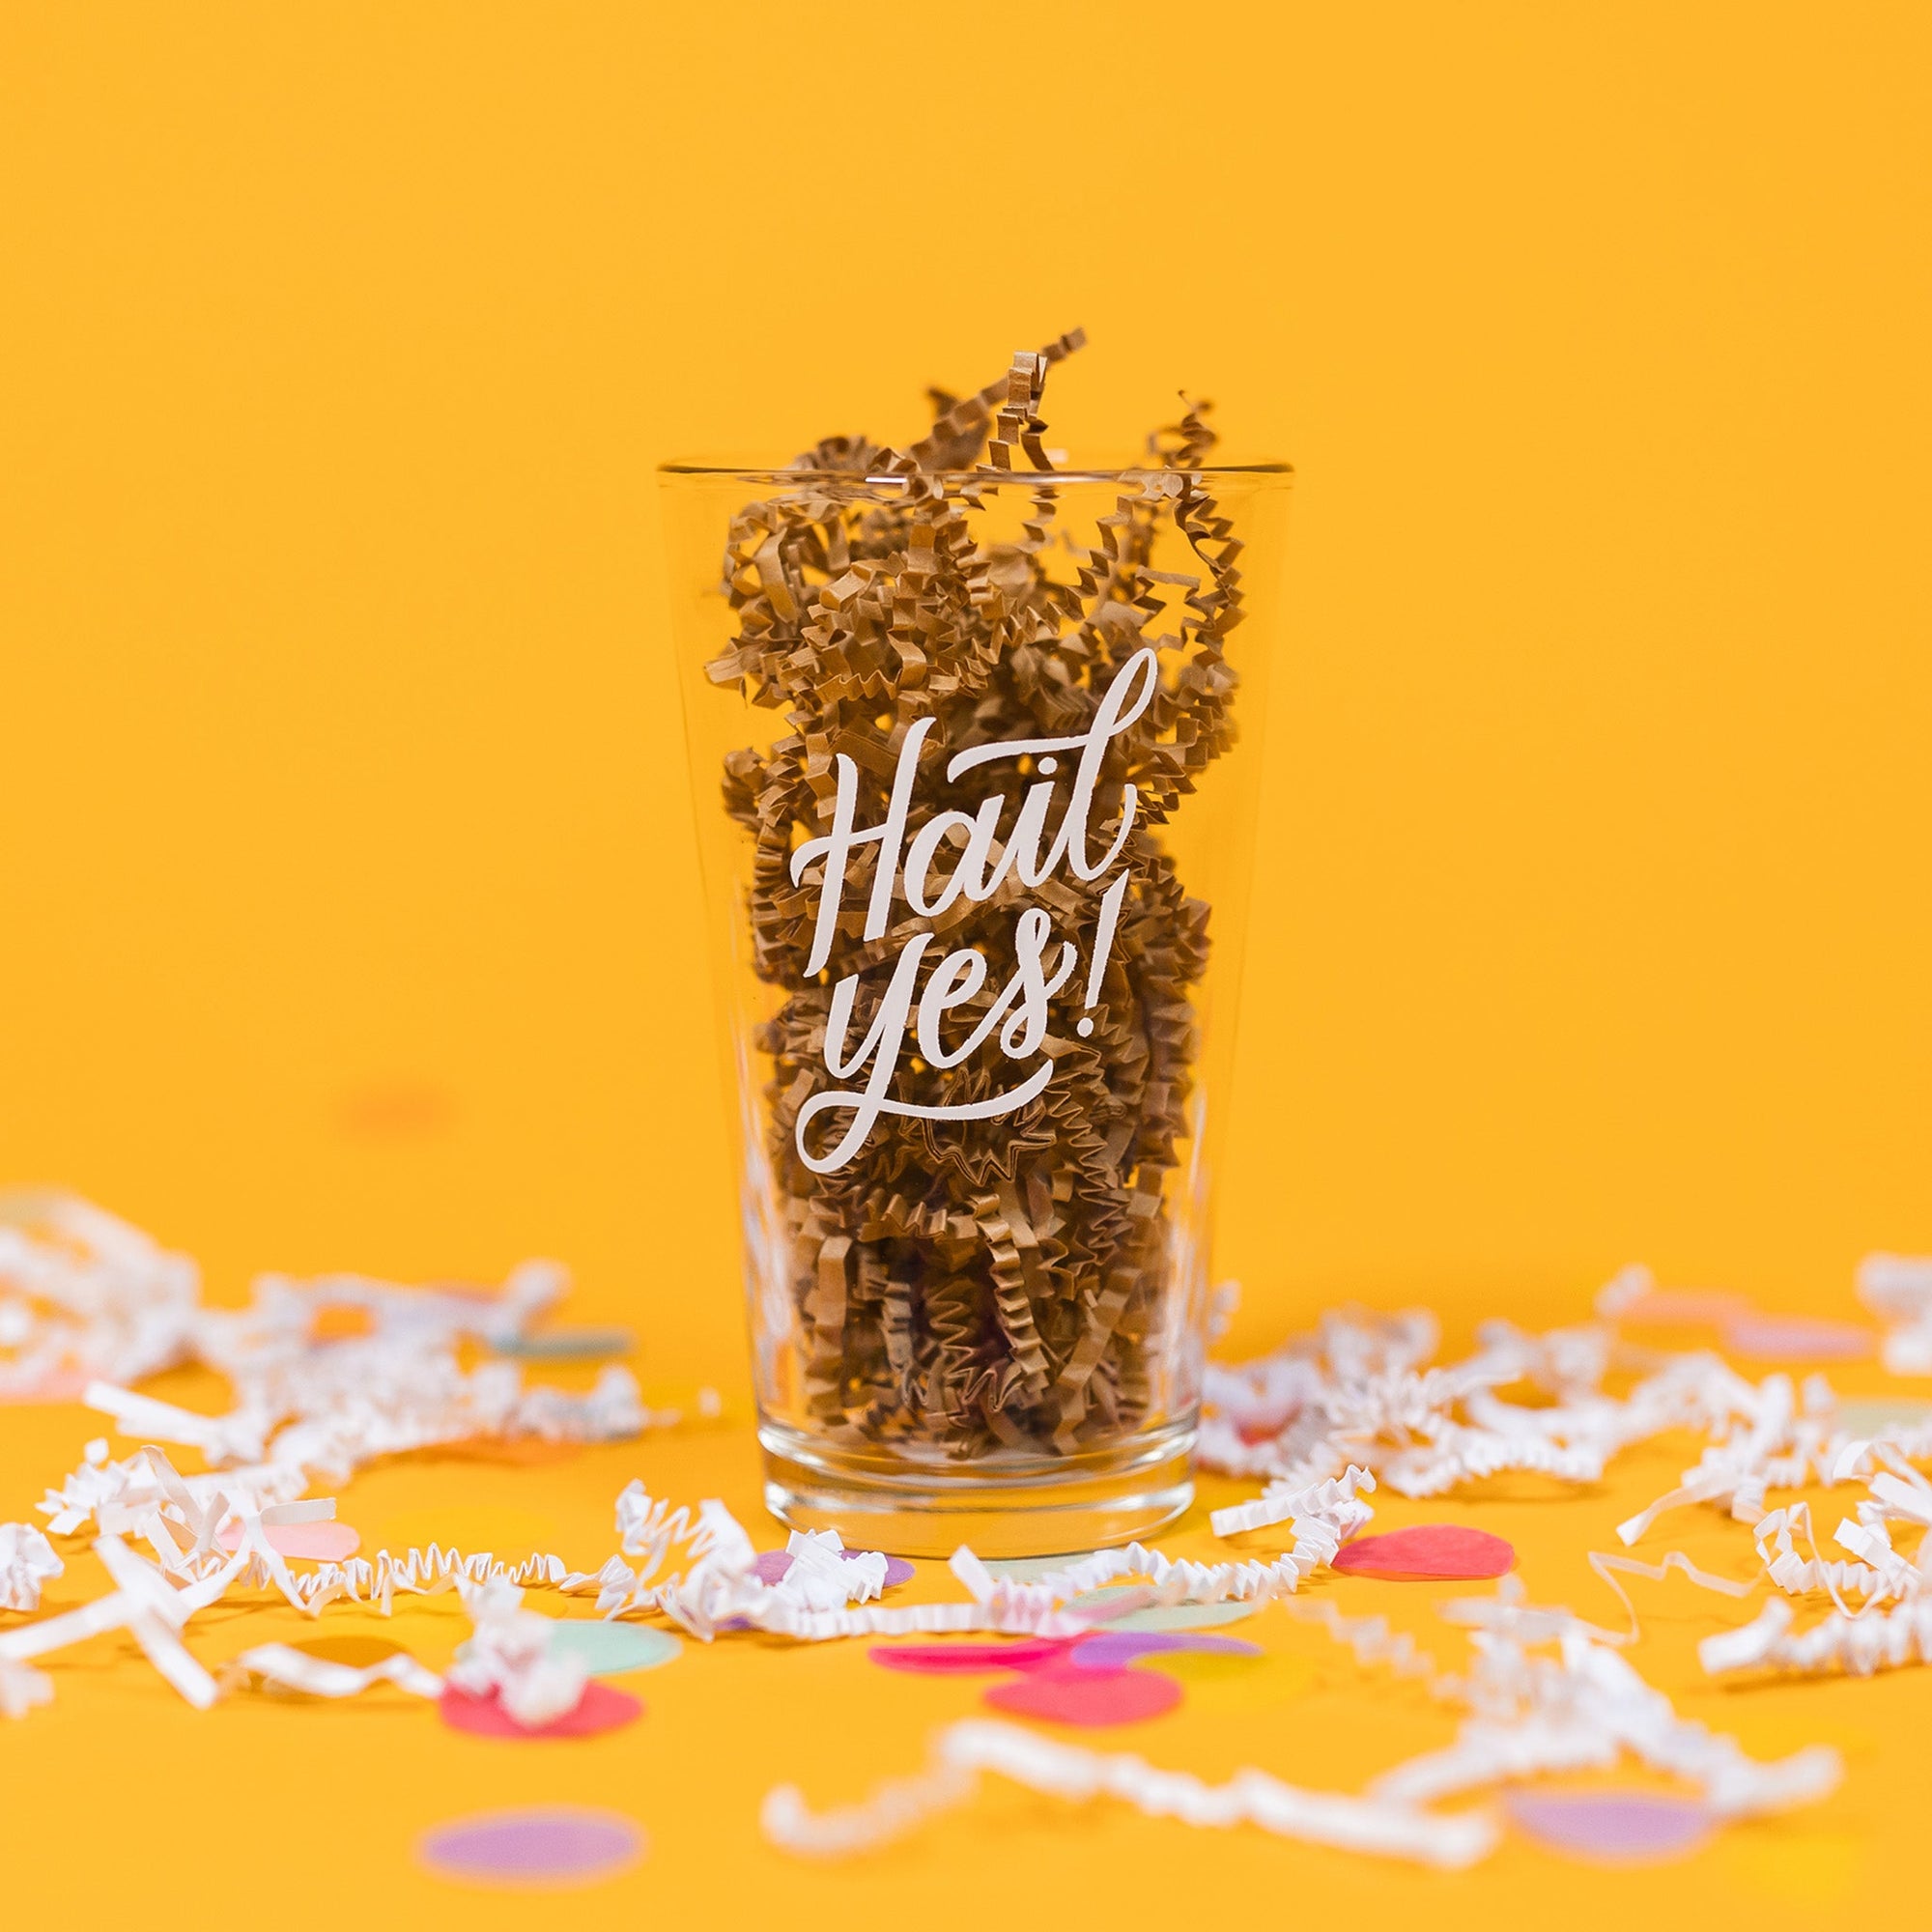 On a sunny mustard background sits a pint glass with white crinkle and big, colorful confetti scattered around. This beer pint glass is filled with kraft crinkle and it says in white hand lettering "Hail Yes!"